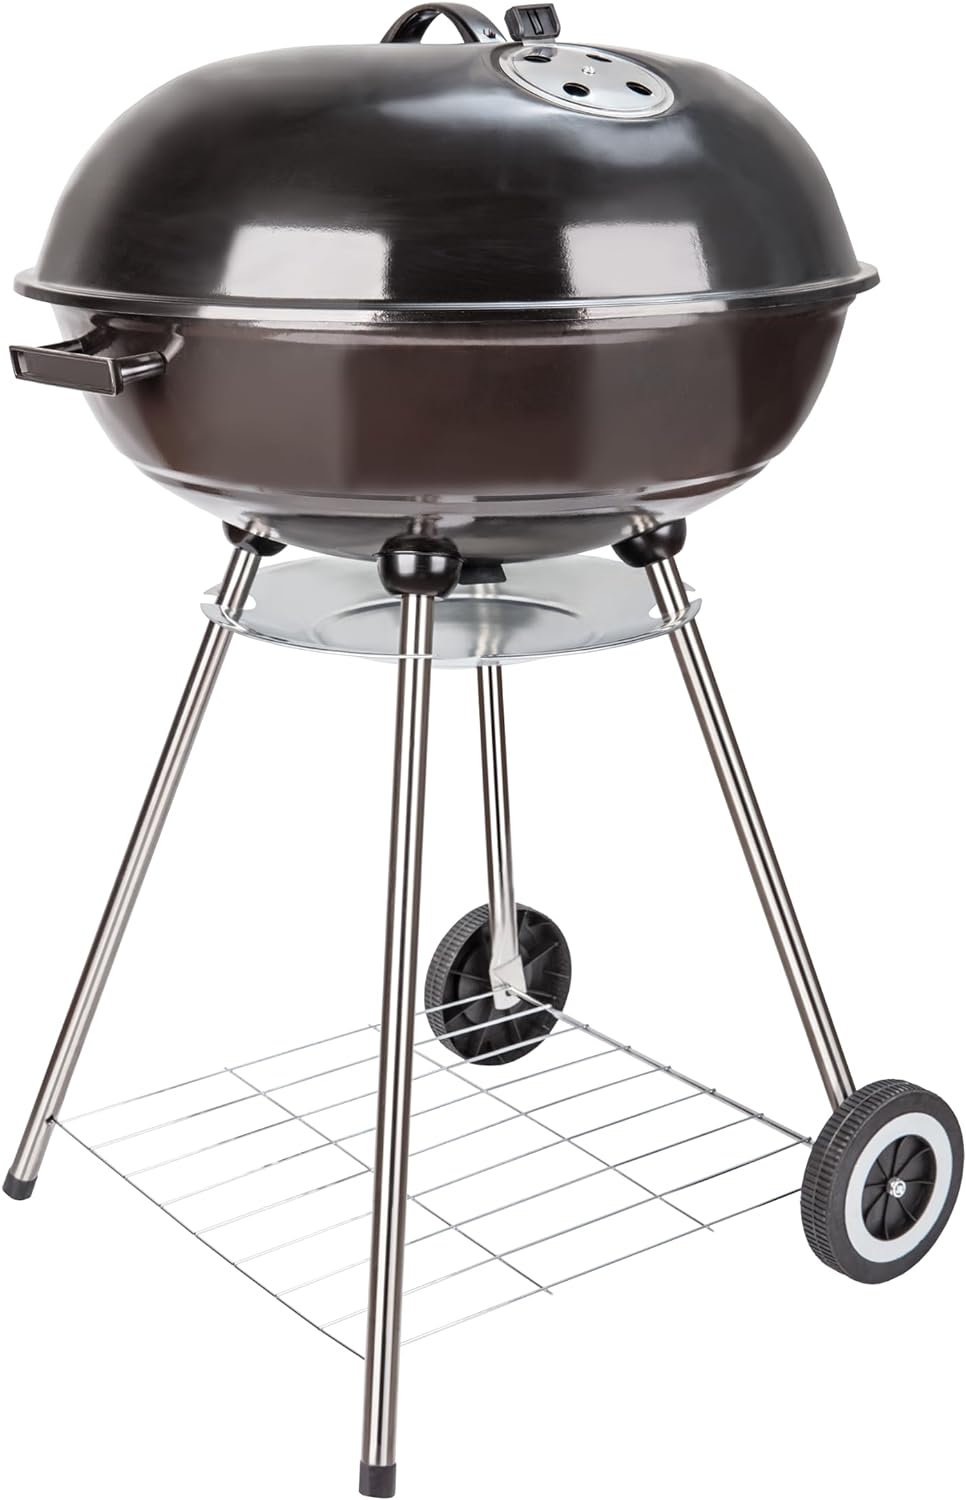 22 Inch Portable Charcoal Grill with Accesories 5 Pieces Grilling Utensil for Outdoor Cooking Barbecue Camping BBQ Kettle Grill - Heavy Duty Round with Thickened Bowl Wheels for Small Patio Backyard